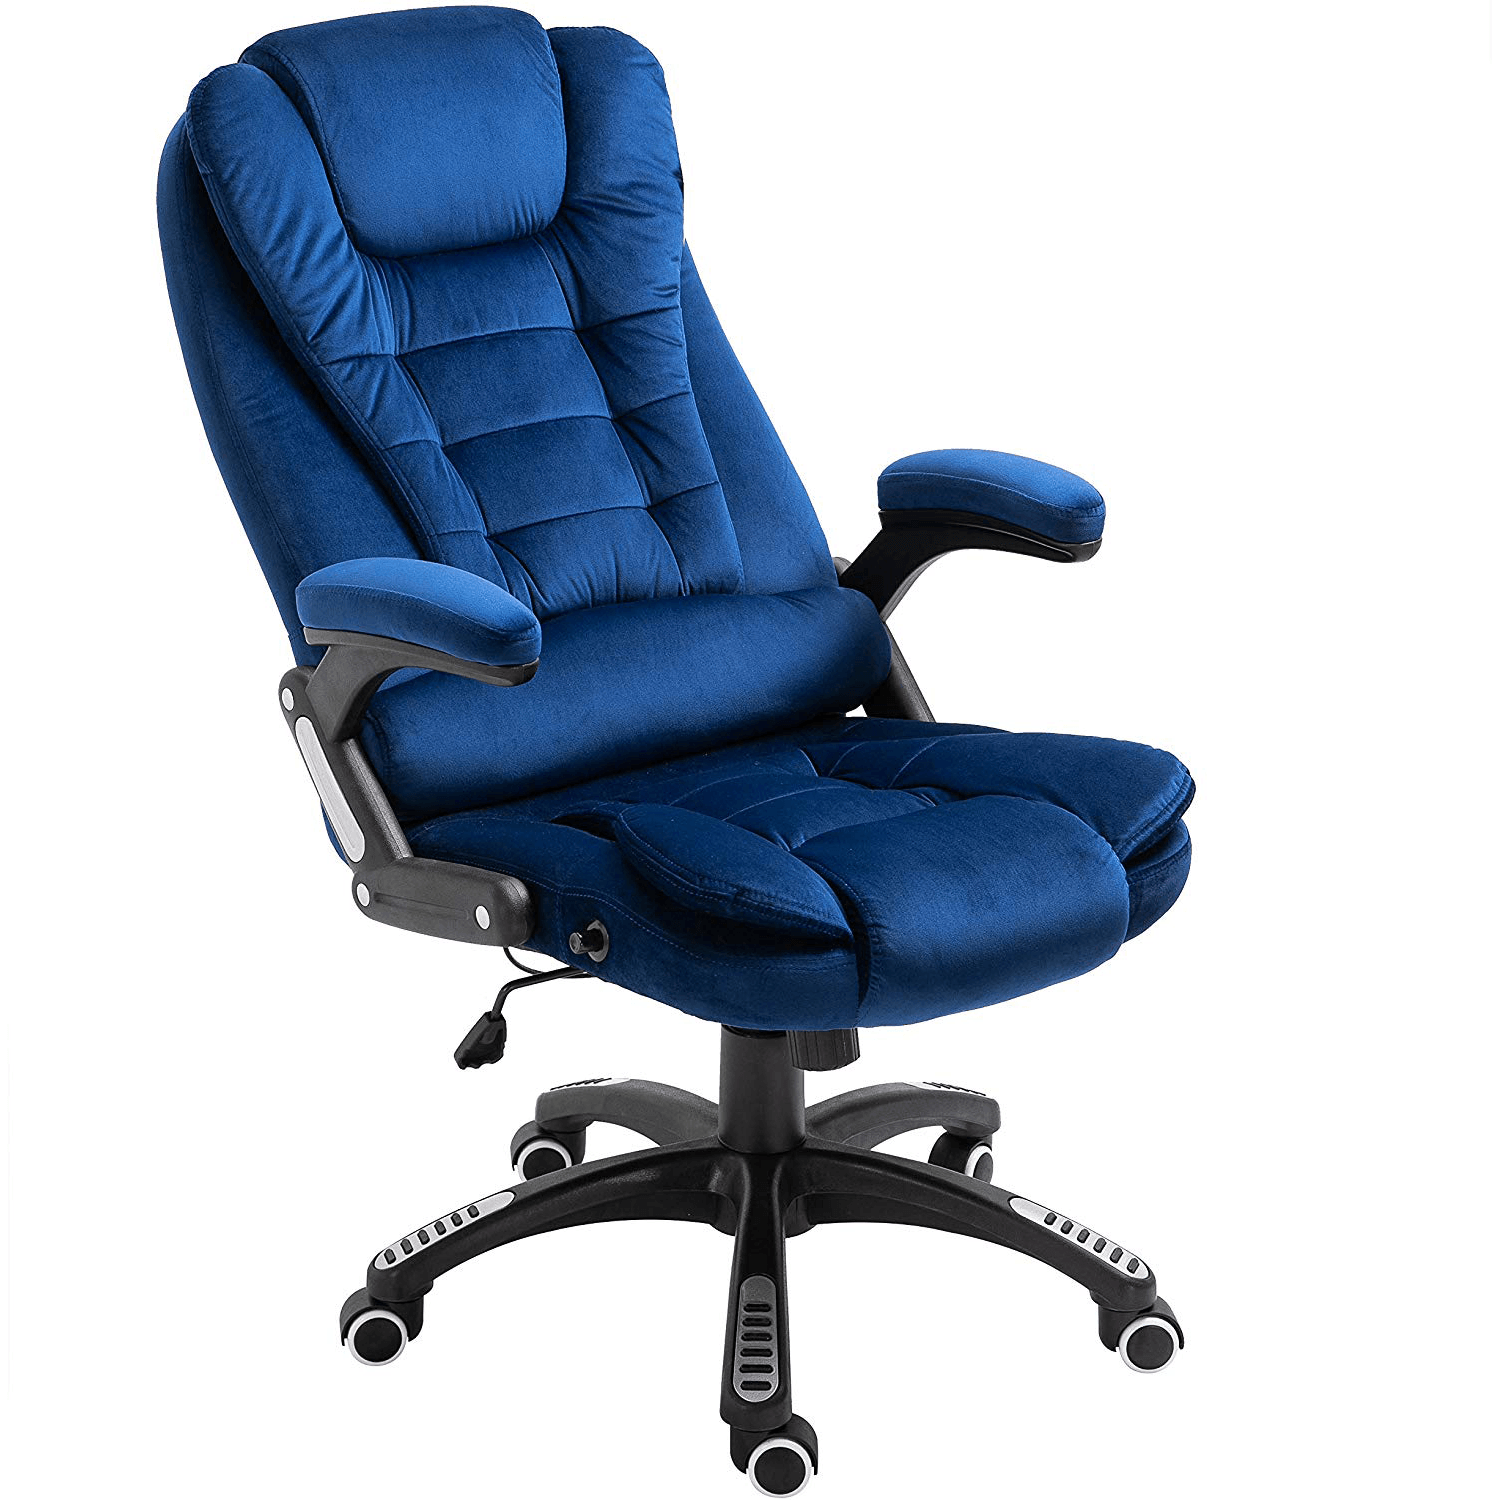 Cherry Tree Furniture Executive Recline Extra Padded Office Chair Standard, MO17 Blue Velvet